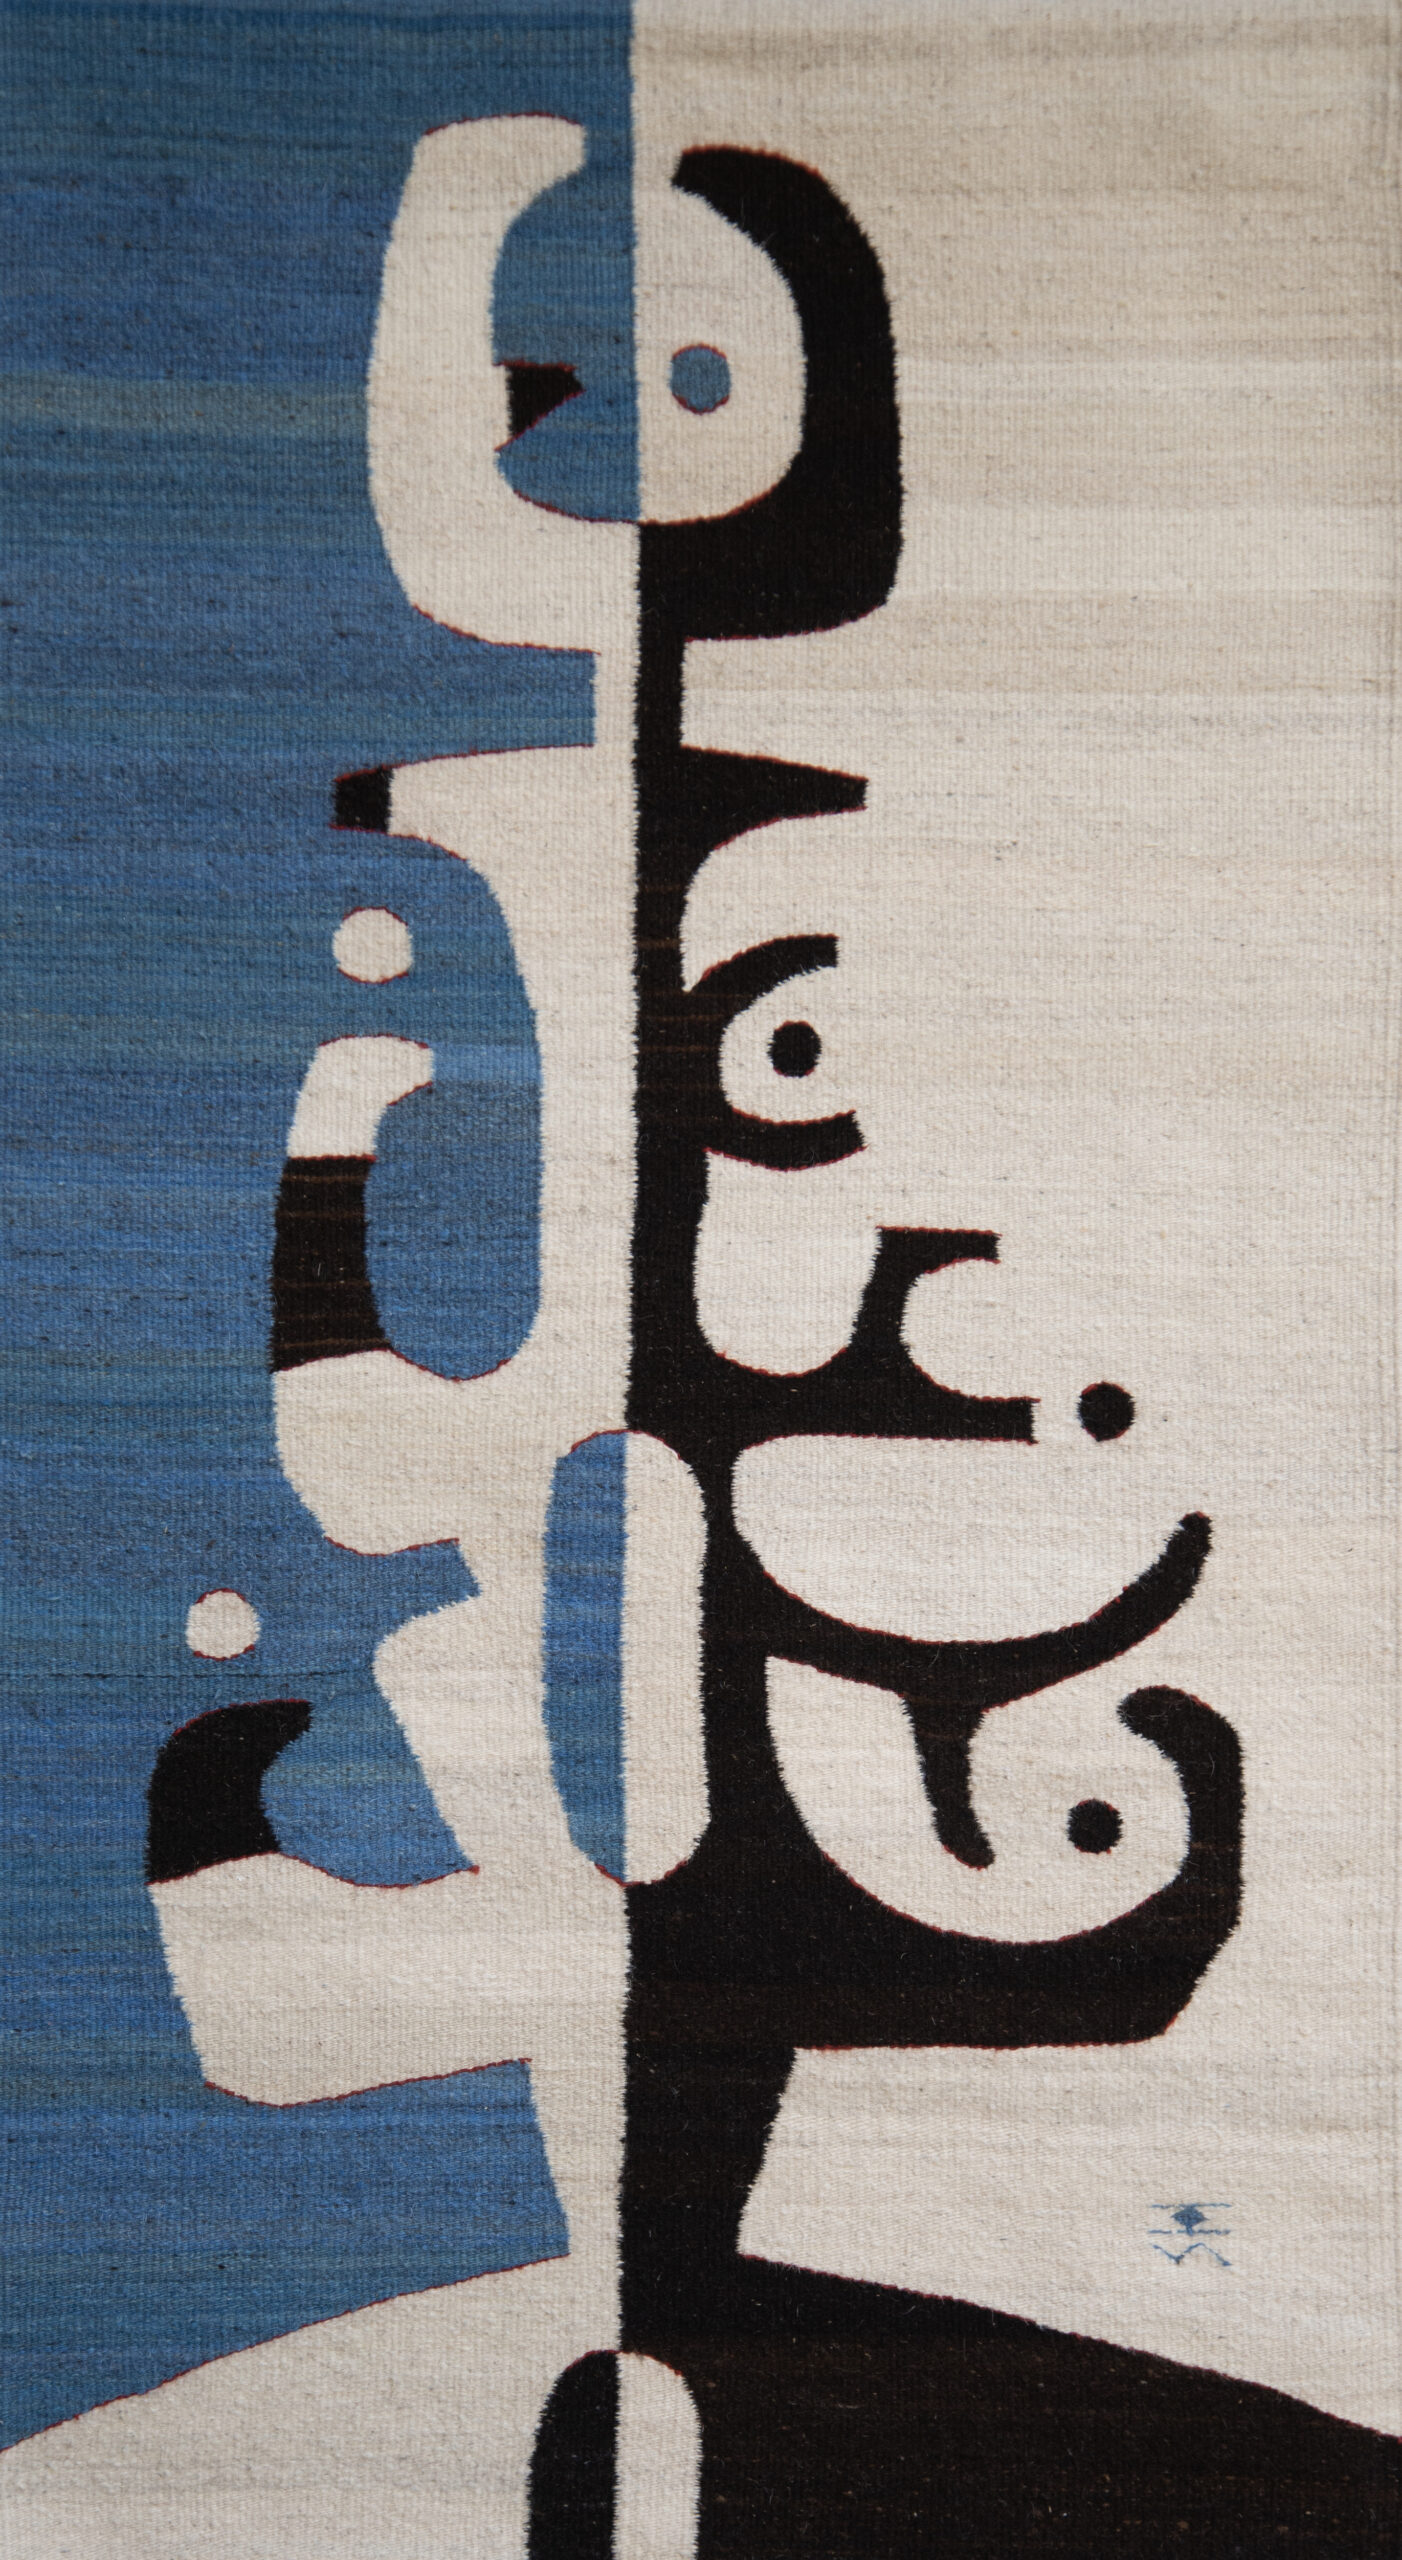 A woven textile work with abstract and geometric designs.